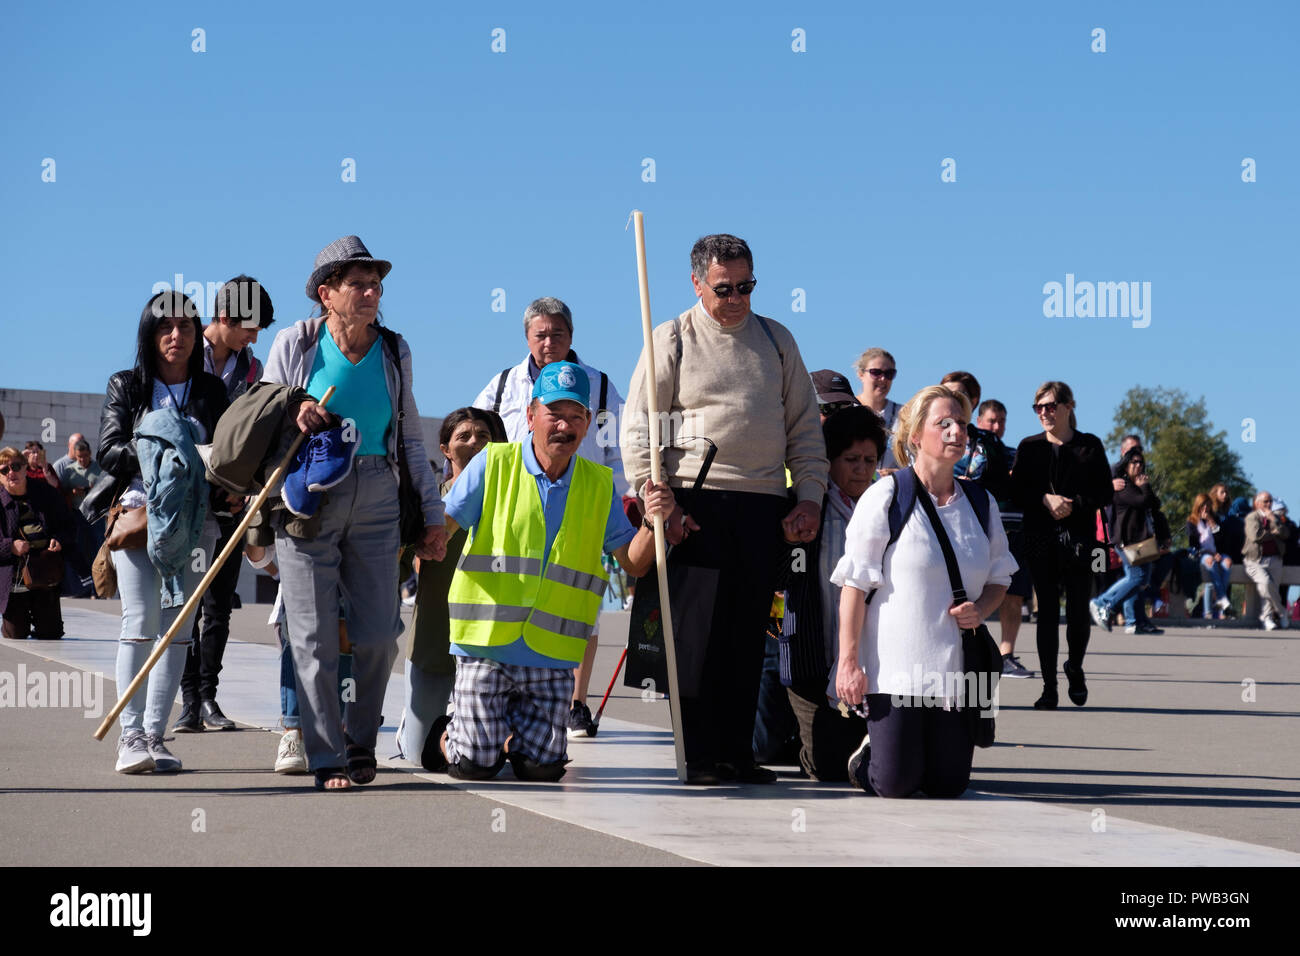 Pilgrims crawling on their knees in penance at the Sanctuary of Our Lady of Fatima, Portugal, Europe Stock Photo